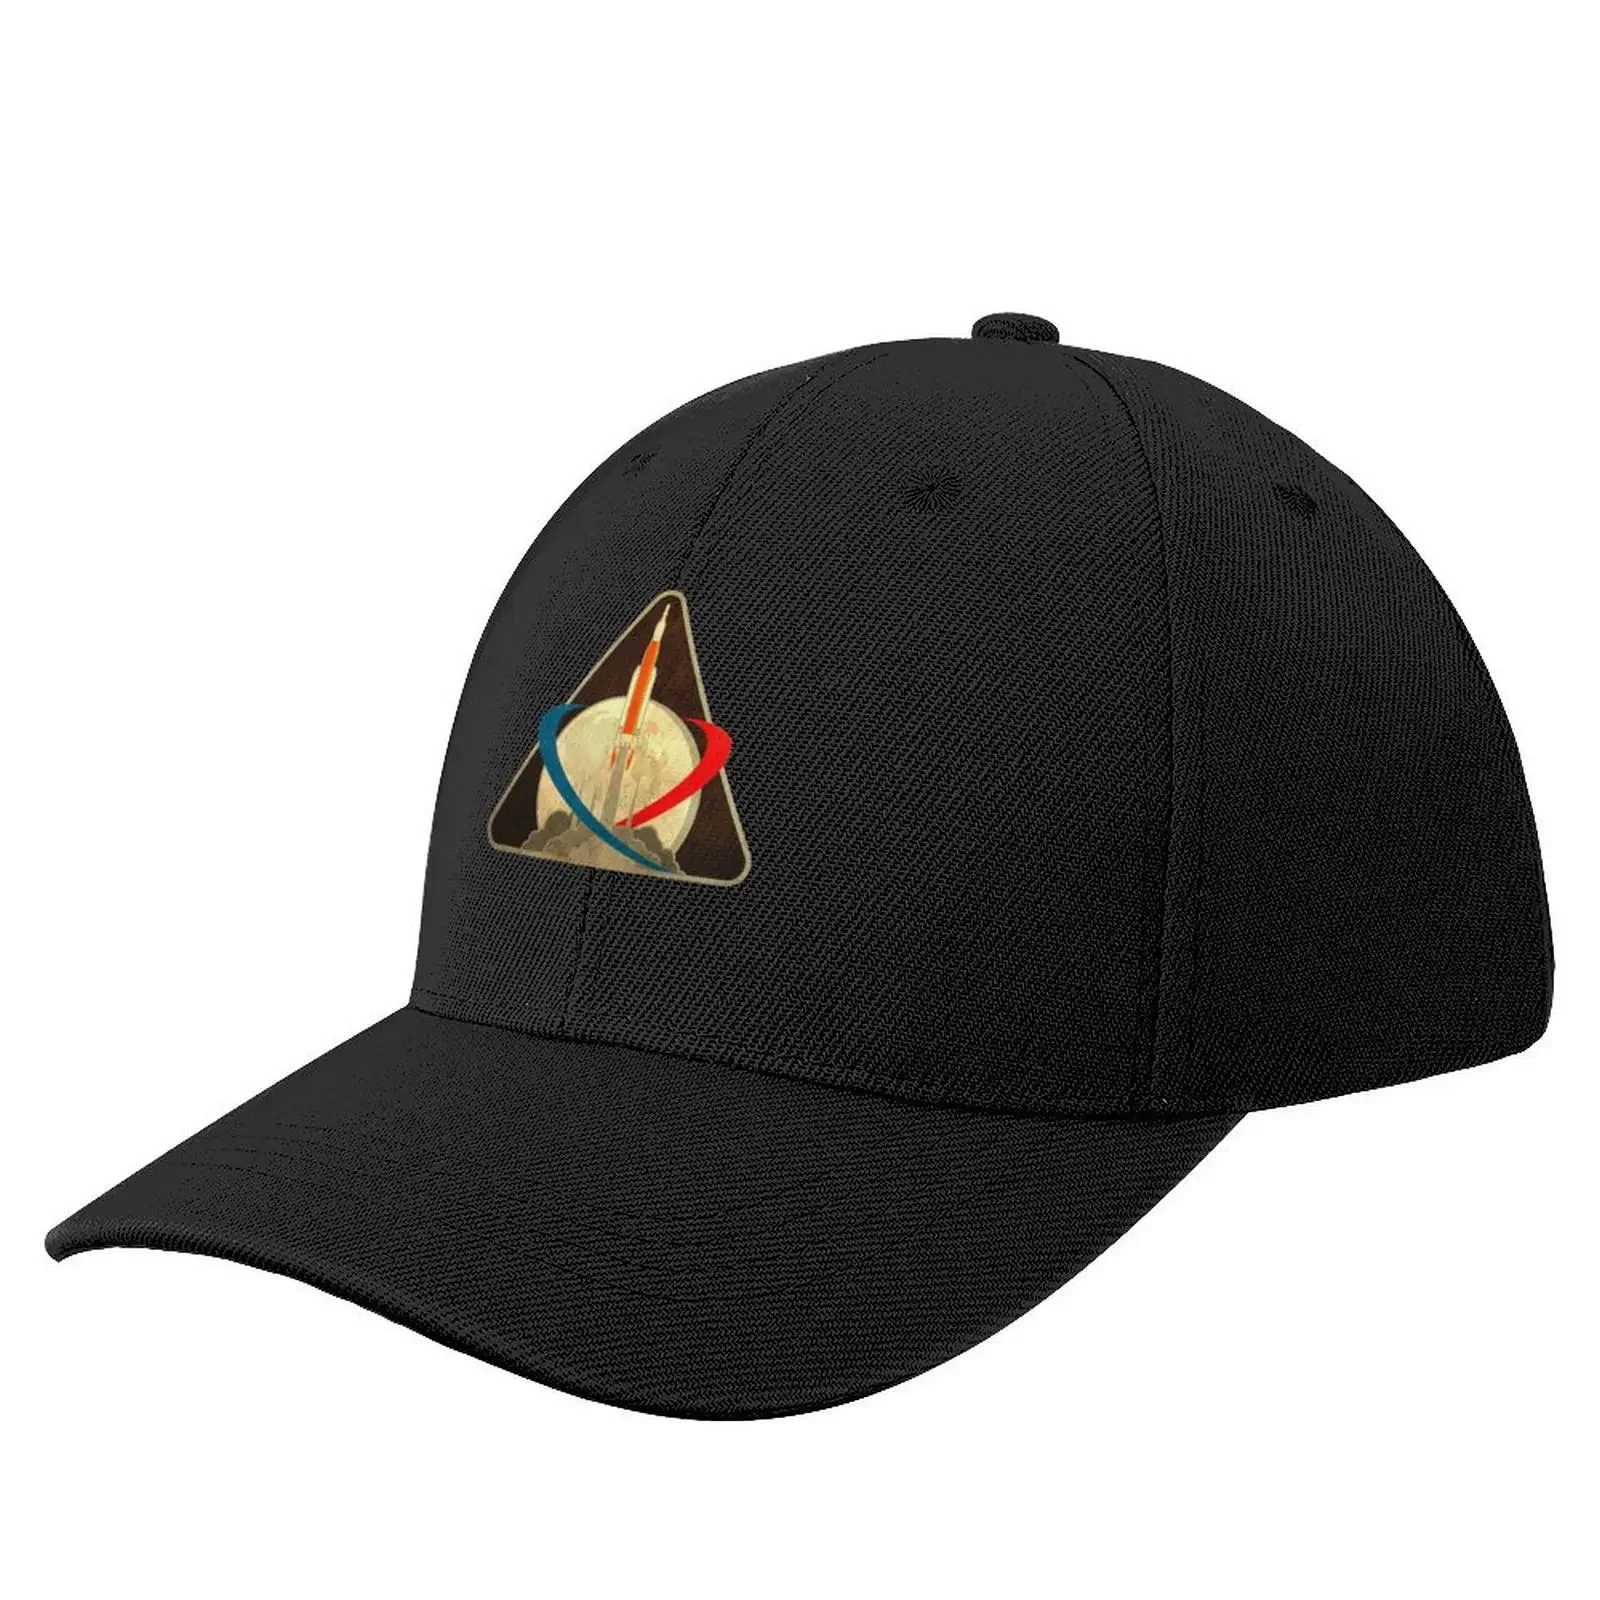 

Artemis 1 mission patch patch - vintage look Baseball Cap Golf Hat New Hat Rugby Luxury Brand For Women Men's